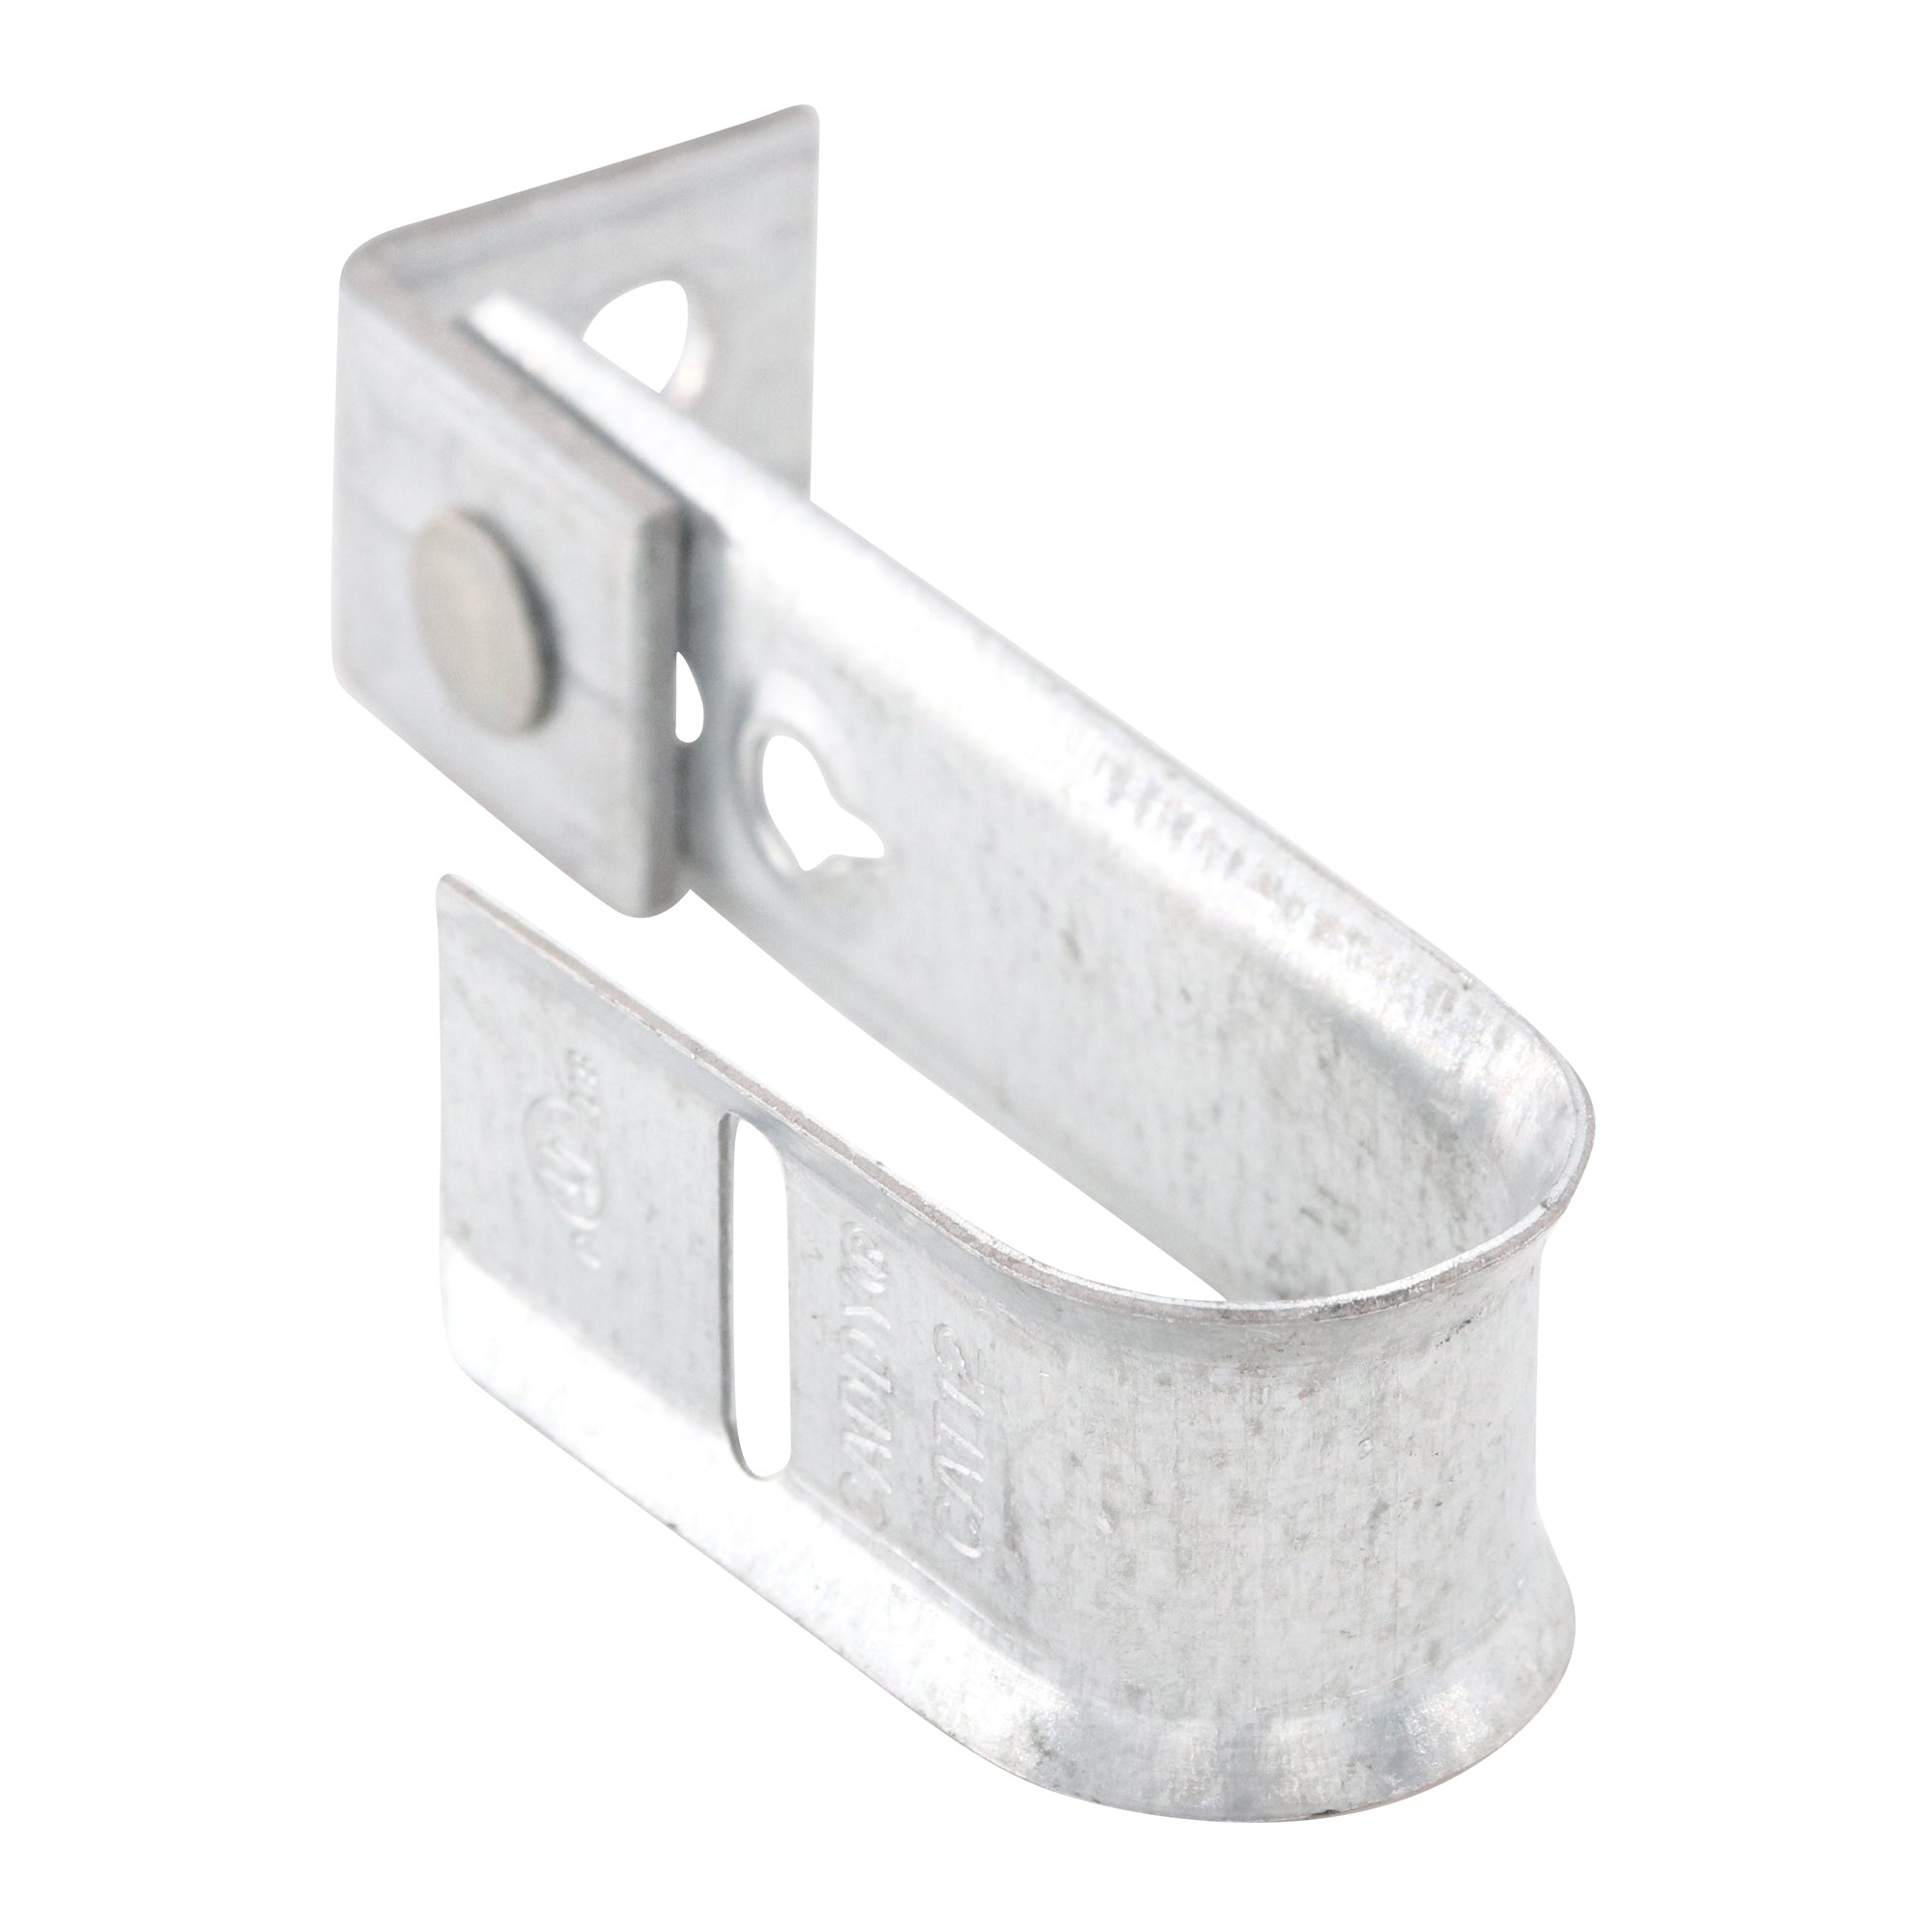 Erico Caddy, CADDY CAT12AB J-HOOK CABLE HANGER BRACKET, 1/4" HOLE, STEEL, 3/4" (40-PACK)